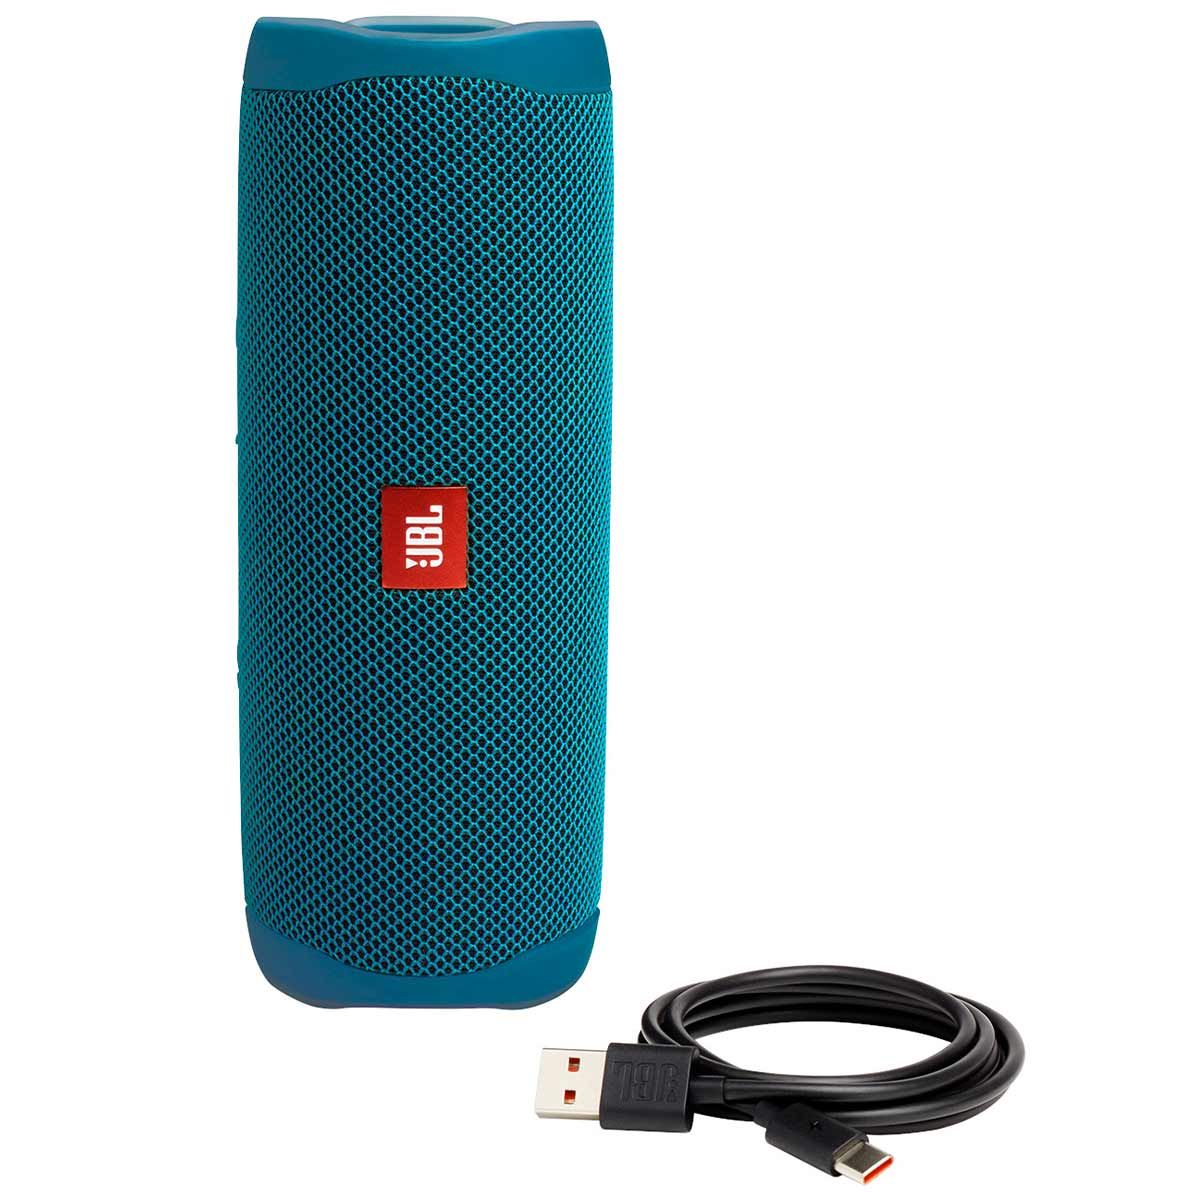 Angled view JBL Flip 5 Eco Edition Waterproof Bluetooth Speaker - Ocean Blue standing on end with charging cable